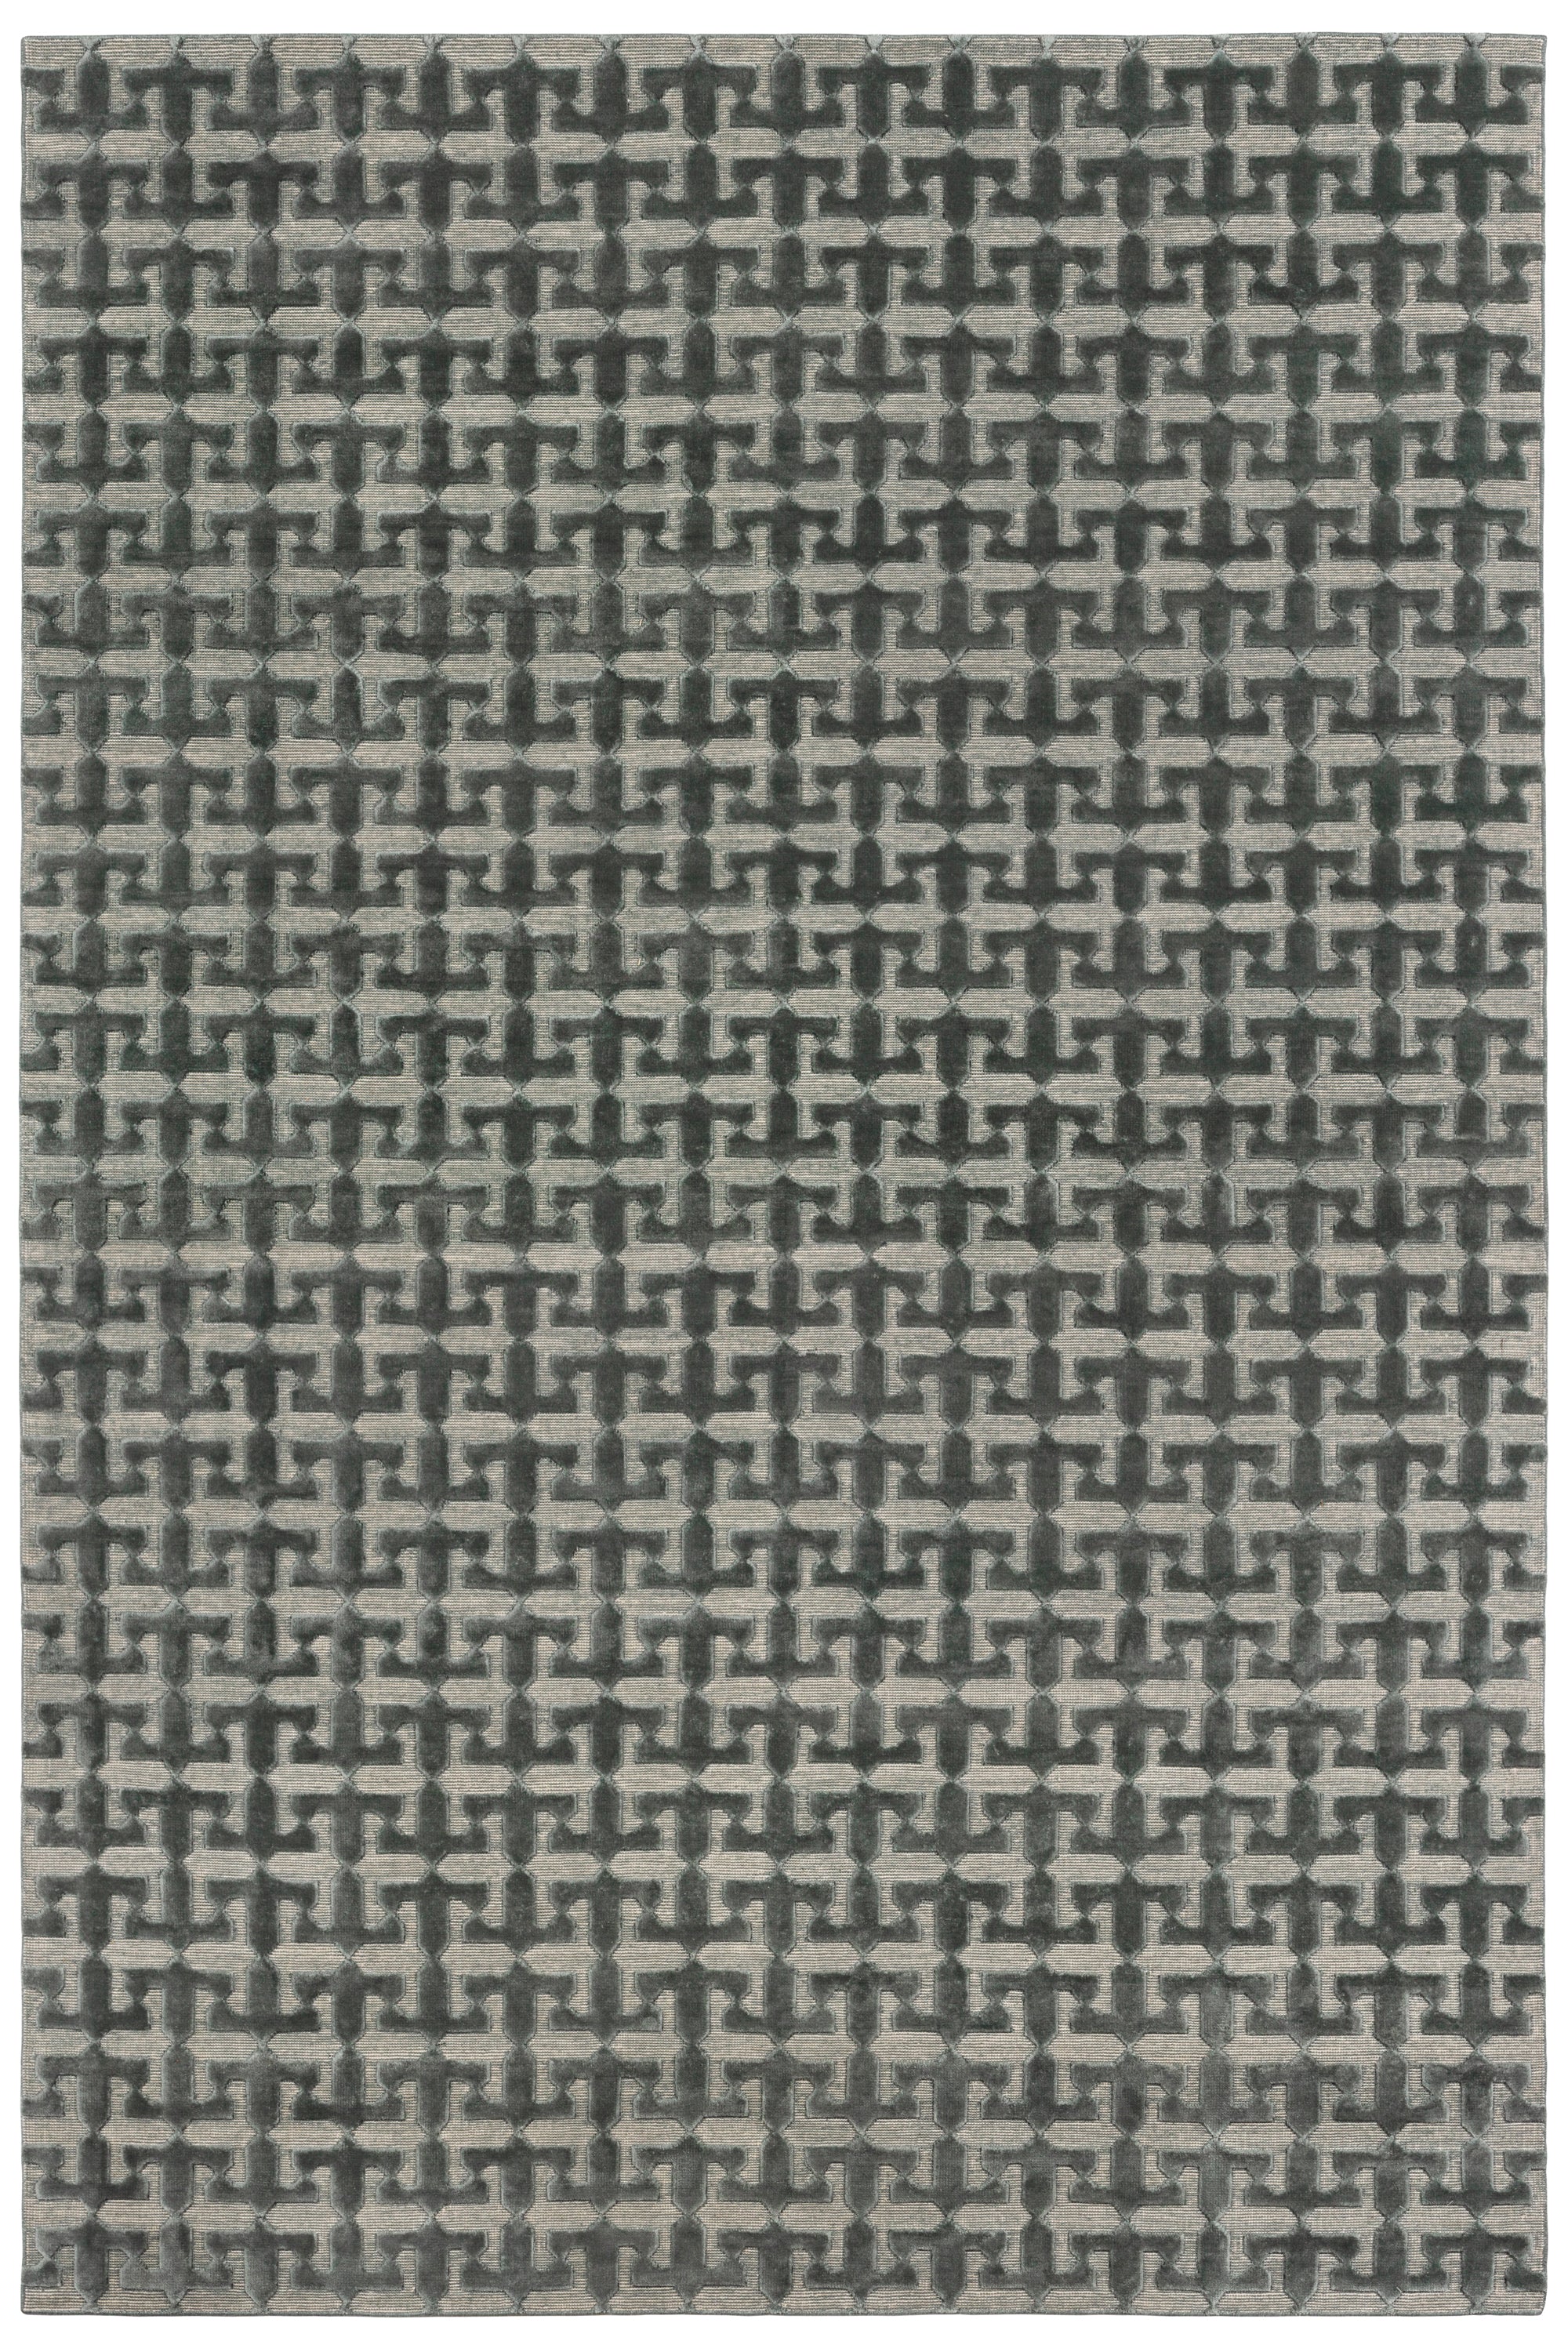 Full size Iseo Rug in Winter Sky, a textural monochromatic abstract geometric pattern in slate grey. 